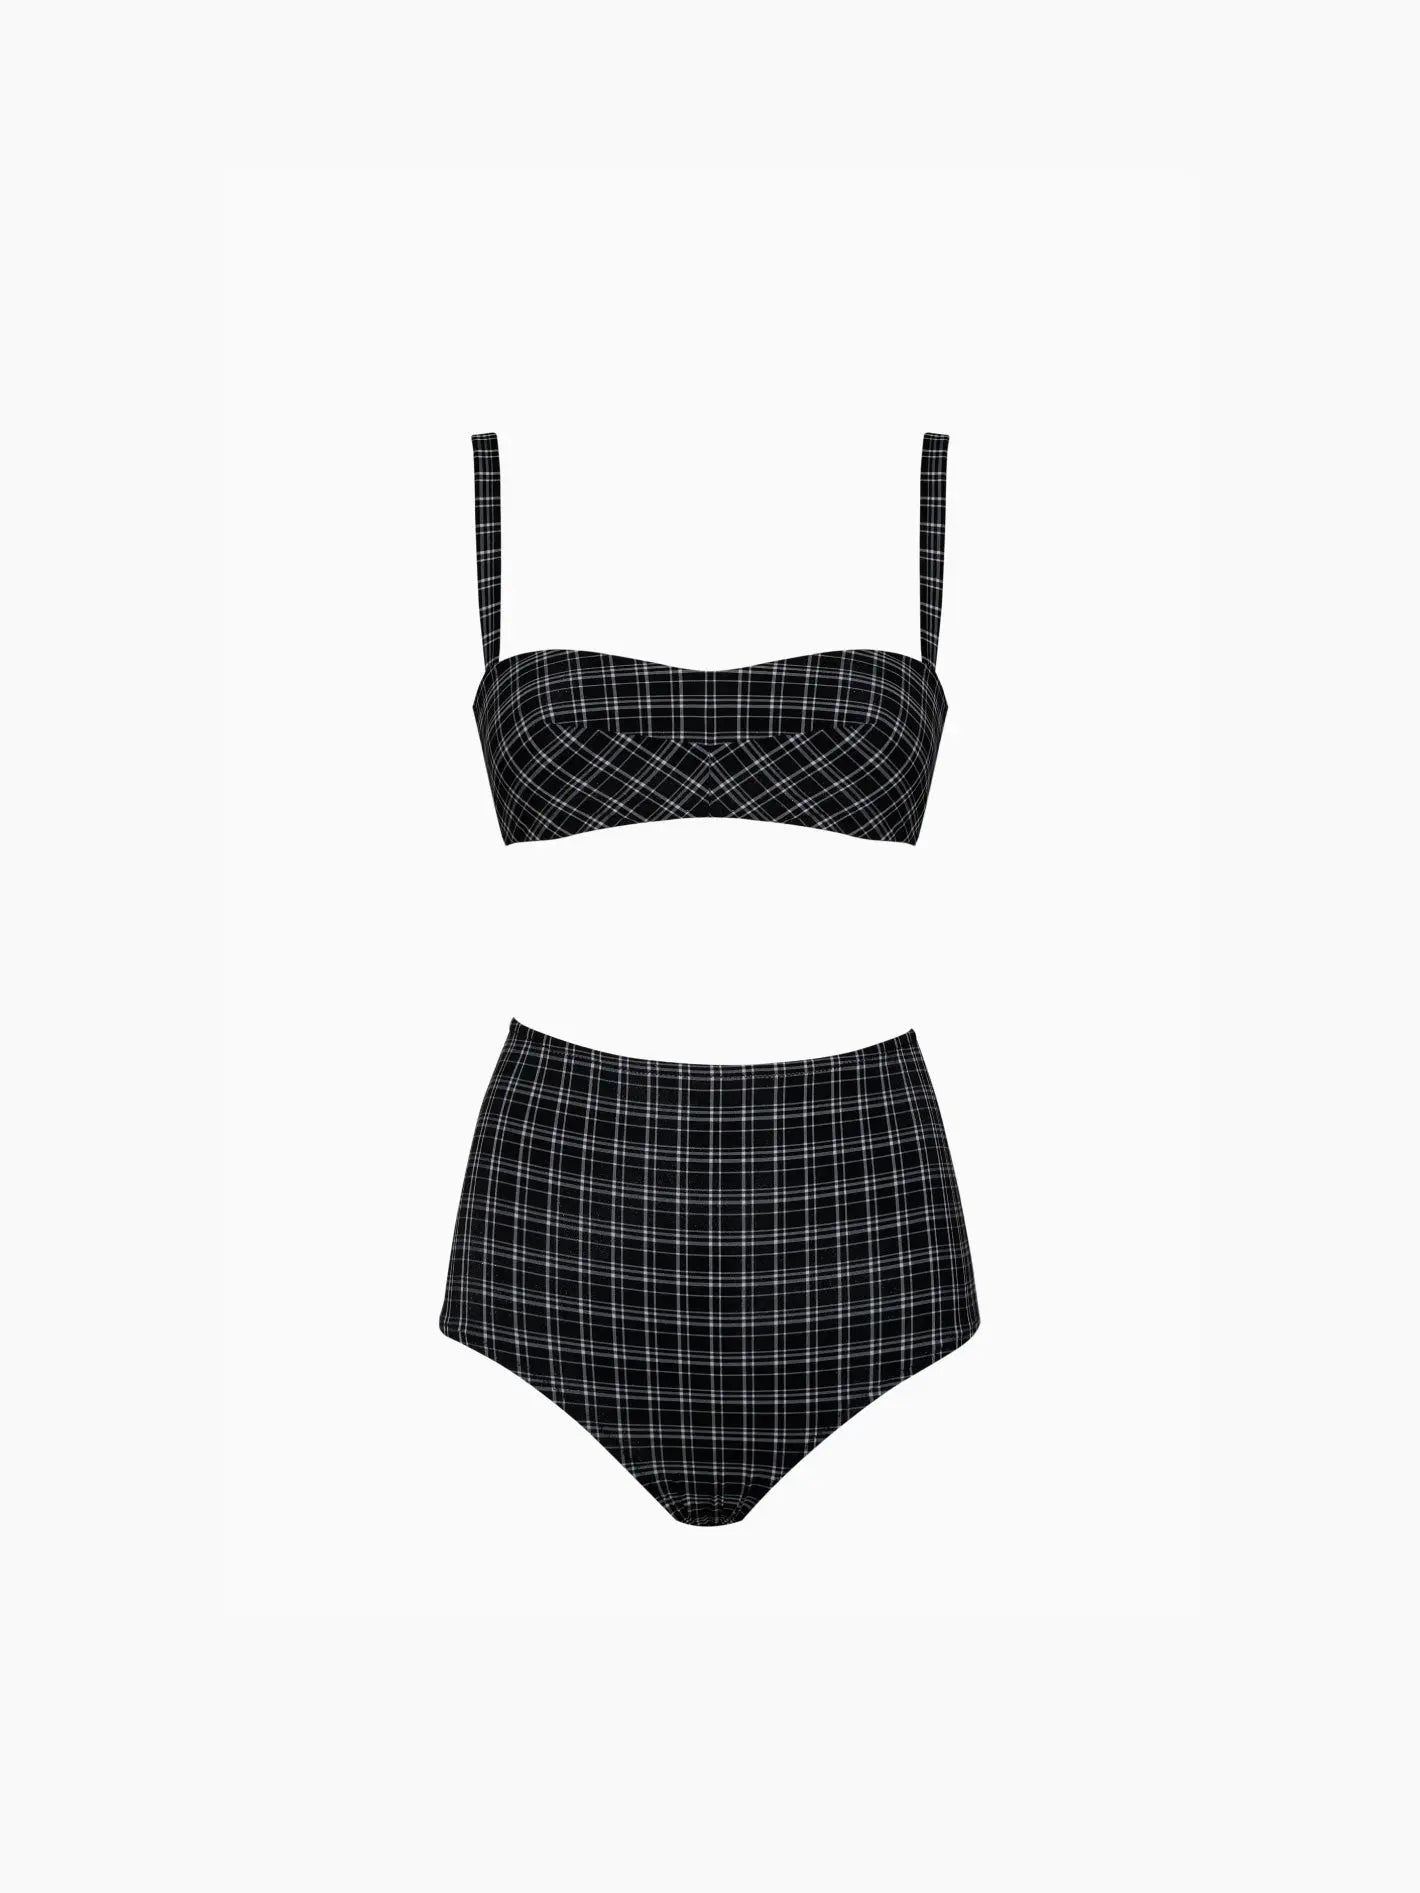 A black and white checkered two-piece swimsuit from Bassalstore in Barcelona, the Mila Bikini B&W by Pale, features a high-waisted bottom and a top with thin shoulder straps. The pattern consists of horizontal and vertical white lines forming a grid, displayed on a plain white background.